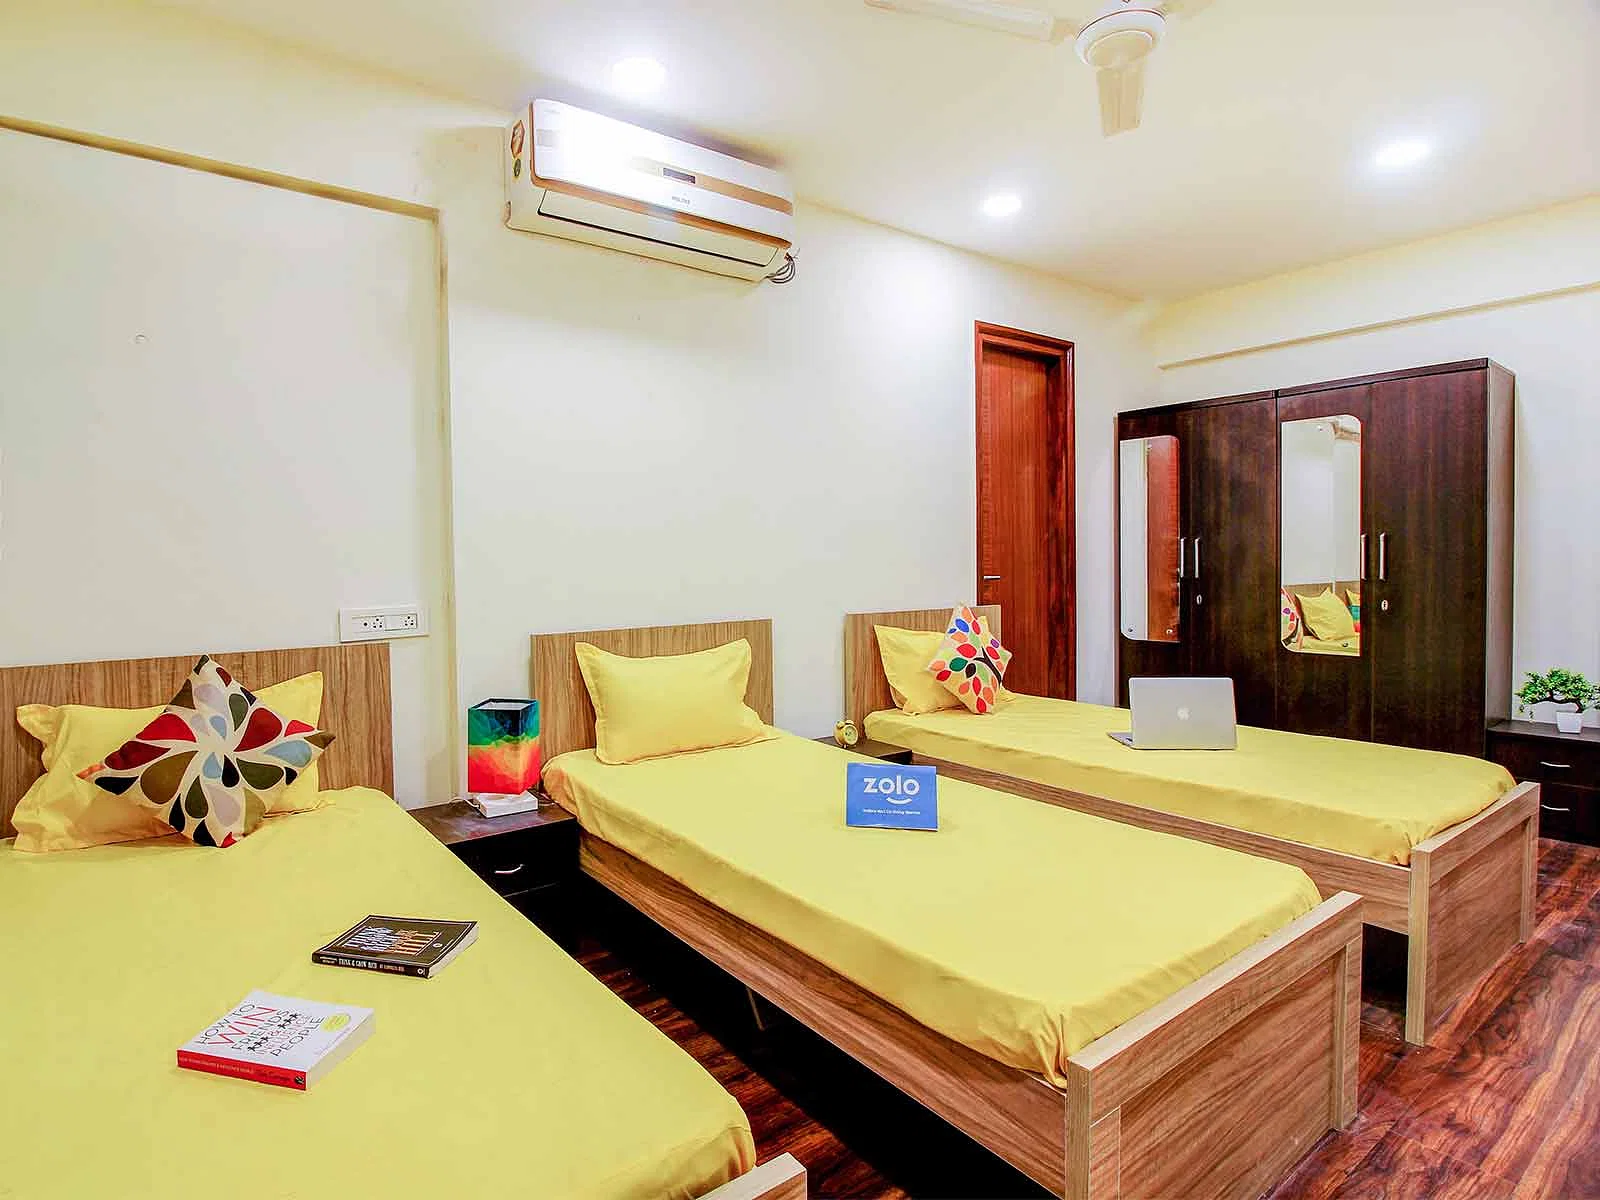 Affordable single rooms for students and working professionals in Andheri East-Mumbai-Zolo Tarun